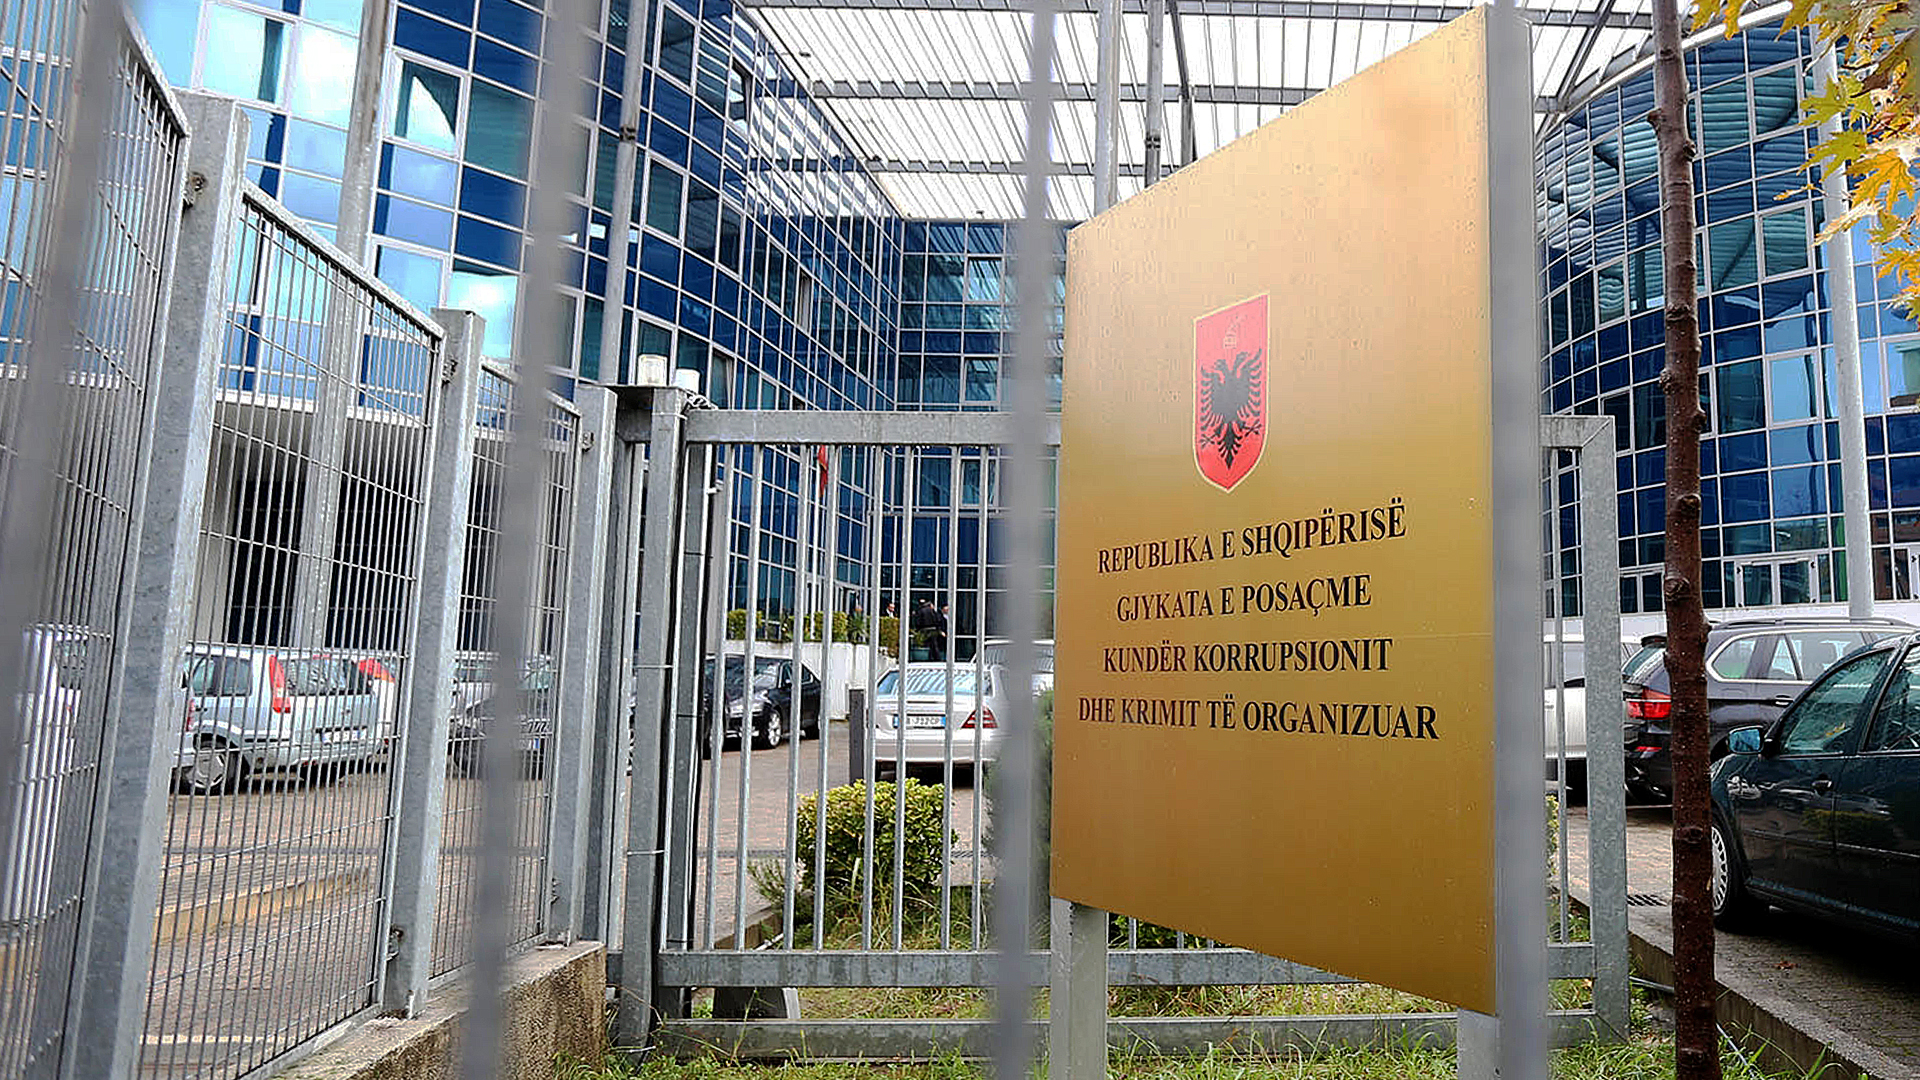 8 Albanian Officials Arrested for Public Procurement-Related Abuses